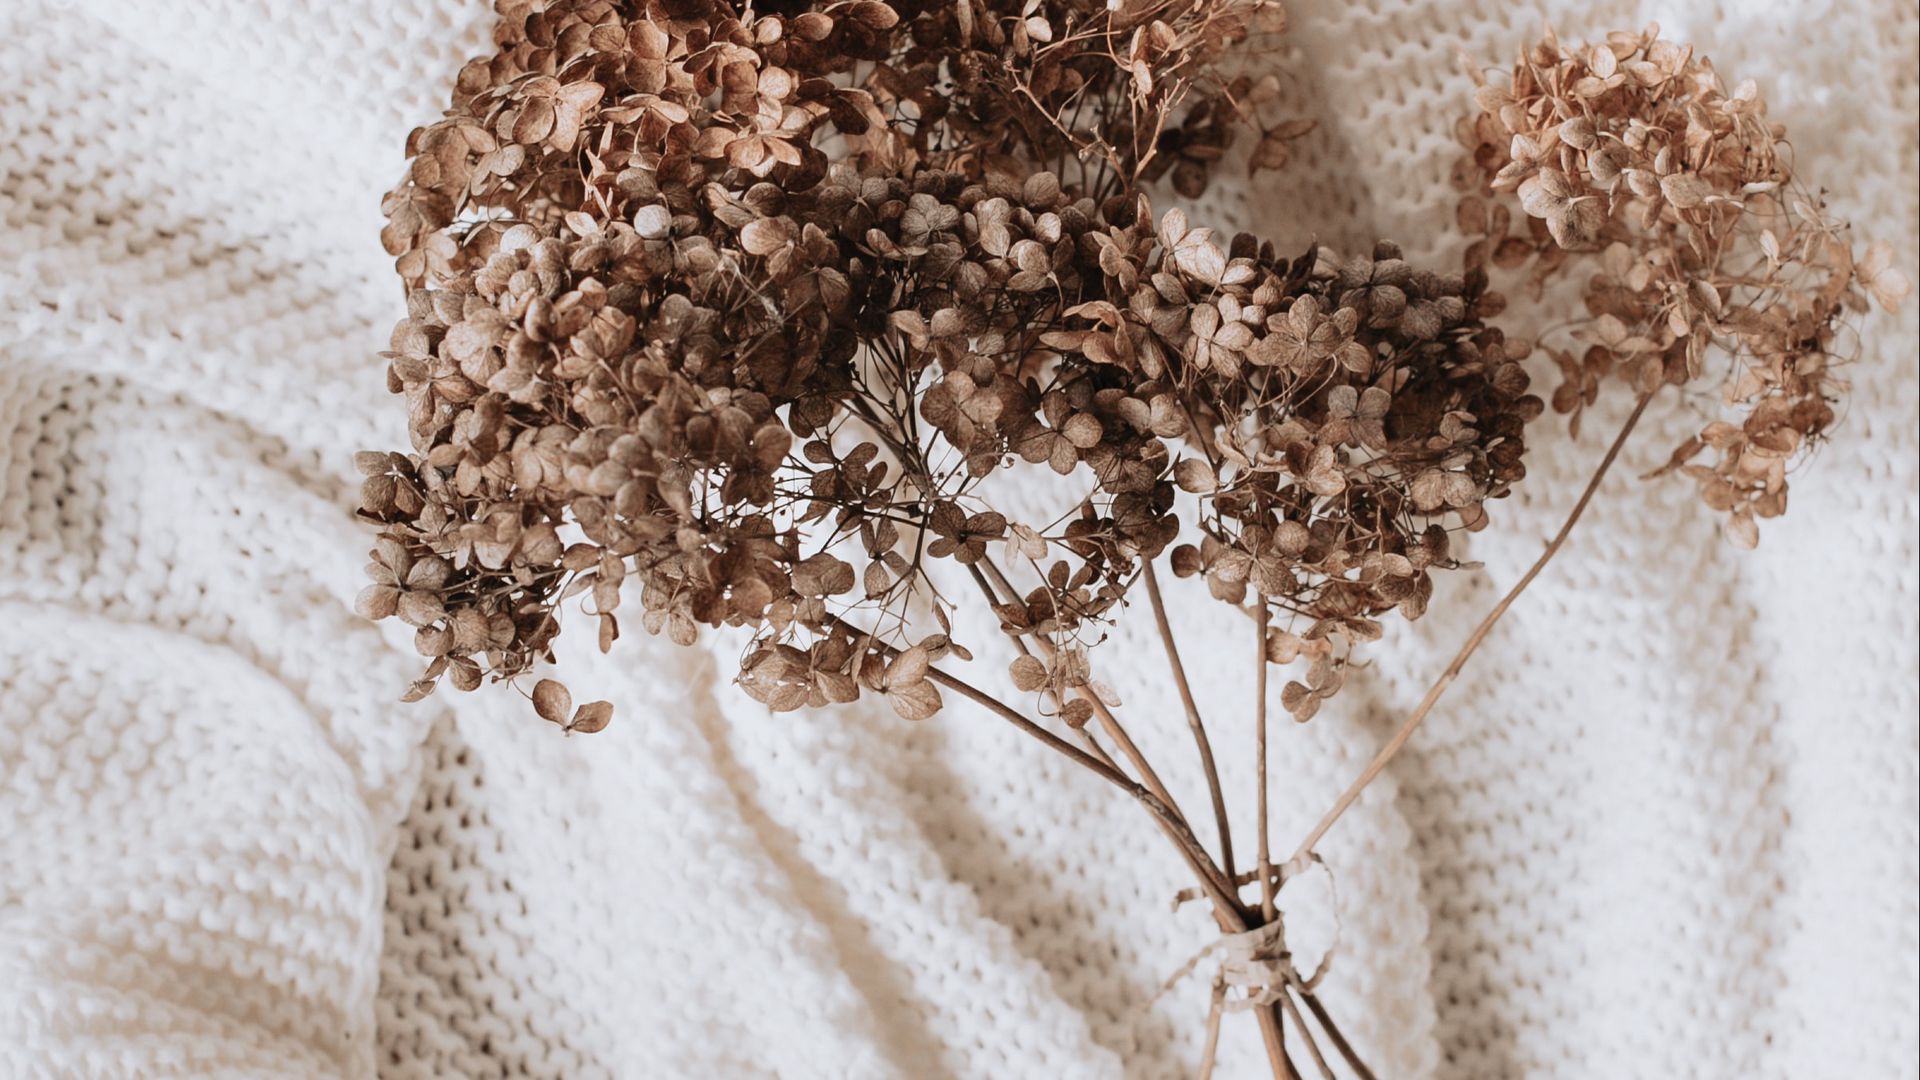 Download wallpaper 1920x1080 hydrangea, dried flowers, flowers, clothes, white full hd, hdtv, fhd, 1080p HD background